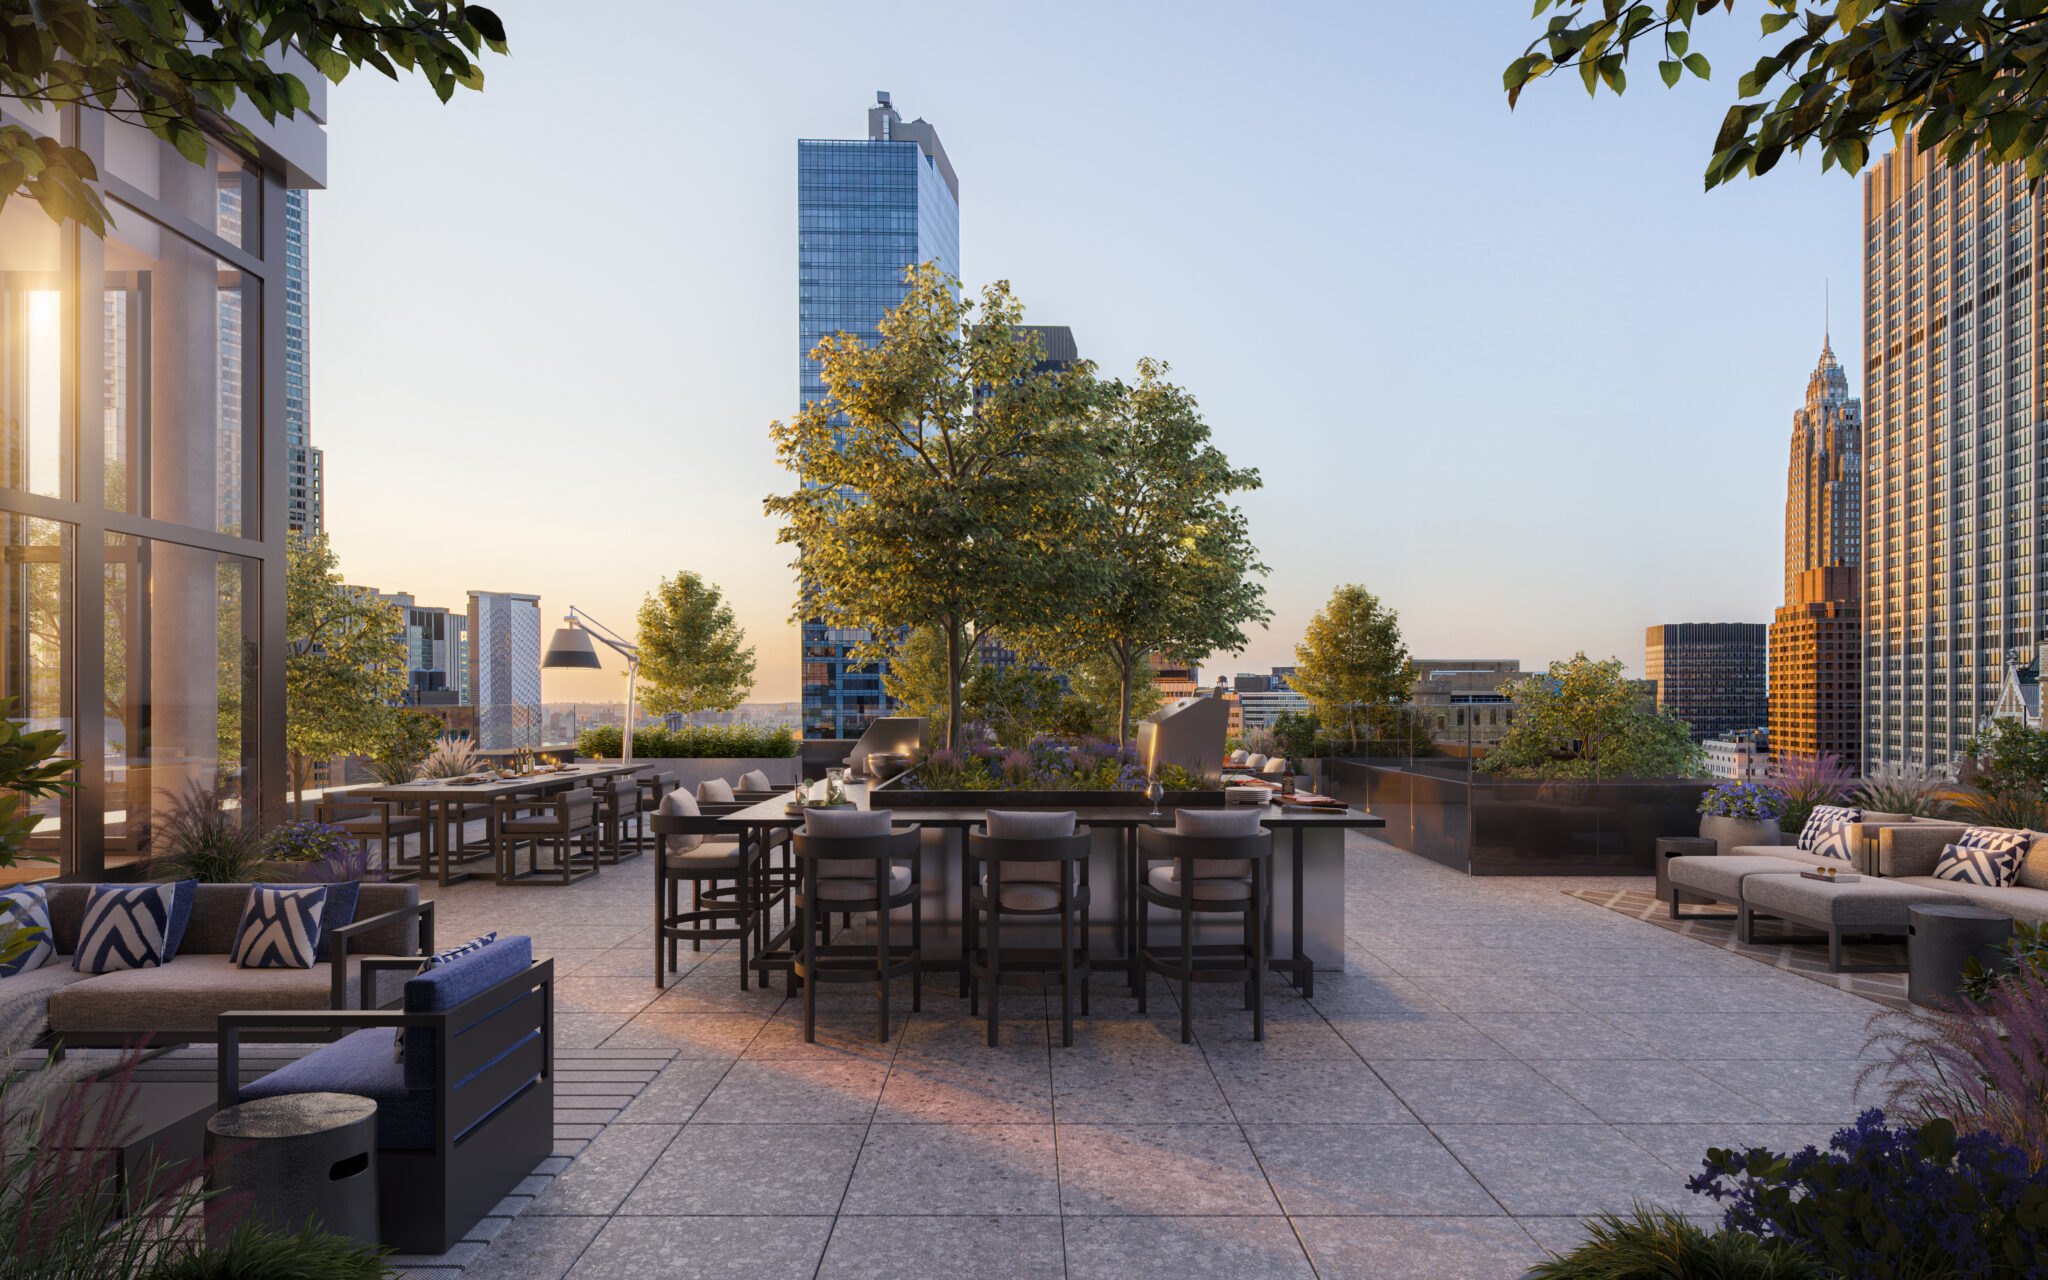 7 Dey outdoor terrace at dusk with many seating options, BBQ station, and expansive NYC views